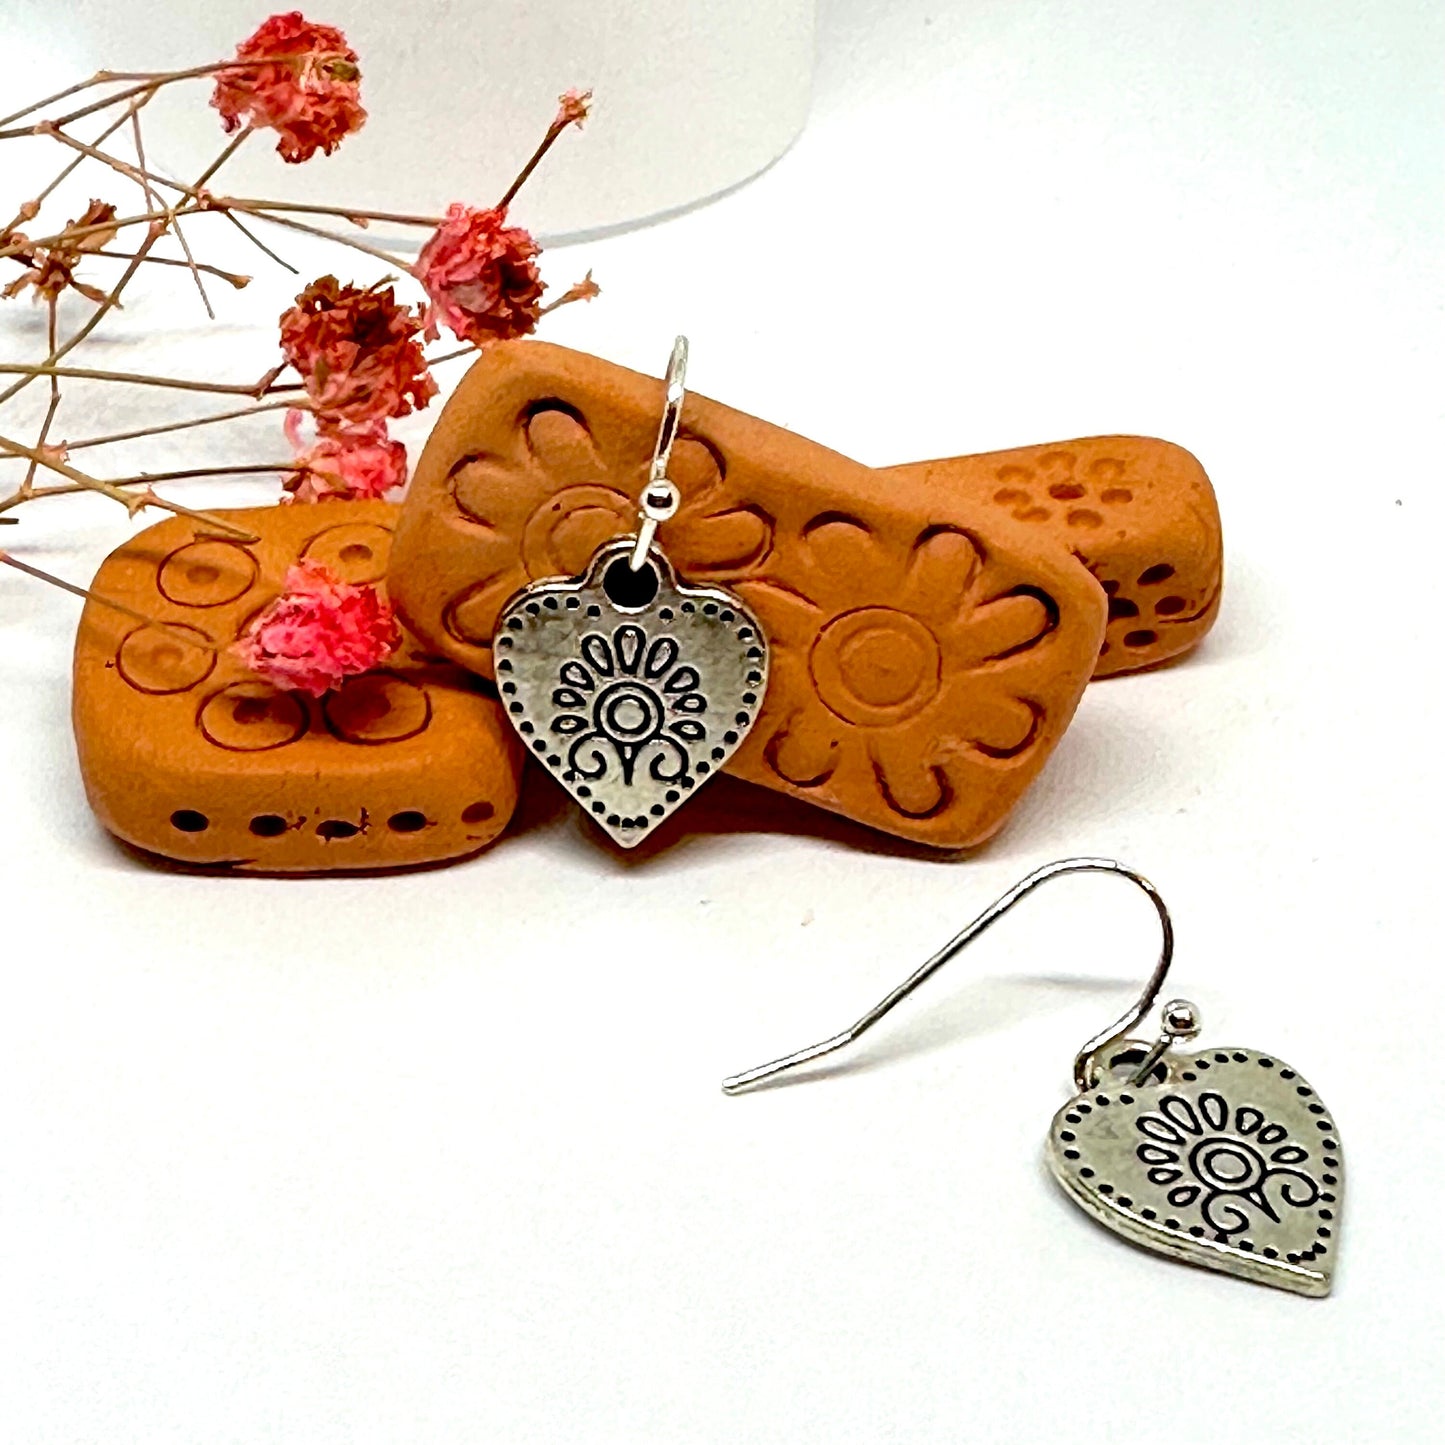 Dainty Carved Heart Earrings Flower Designs Flowered Heart Earrings Floral Design Motifs Ancient Mexico Pre-Columbian Mexican Silver Jewelry